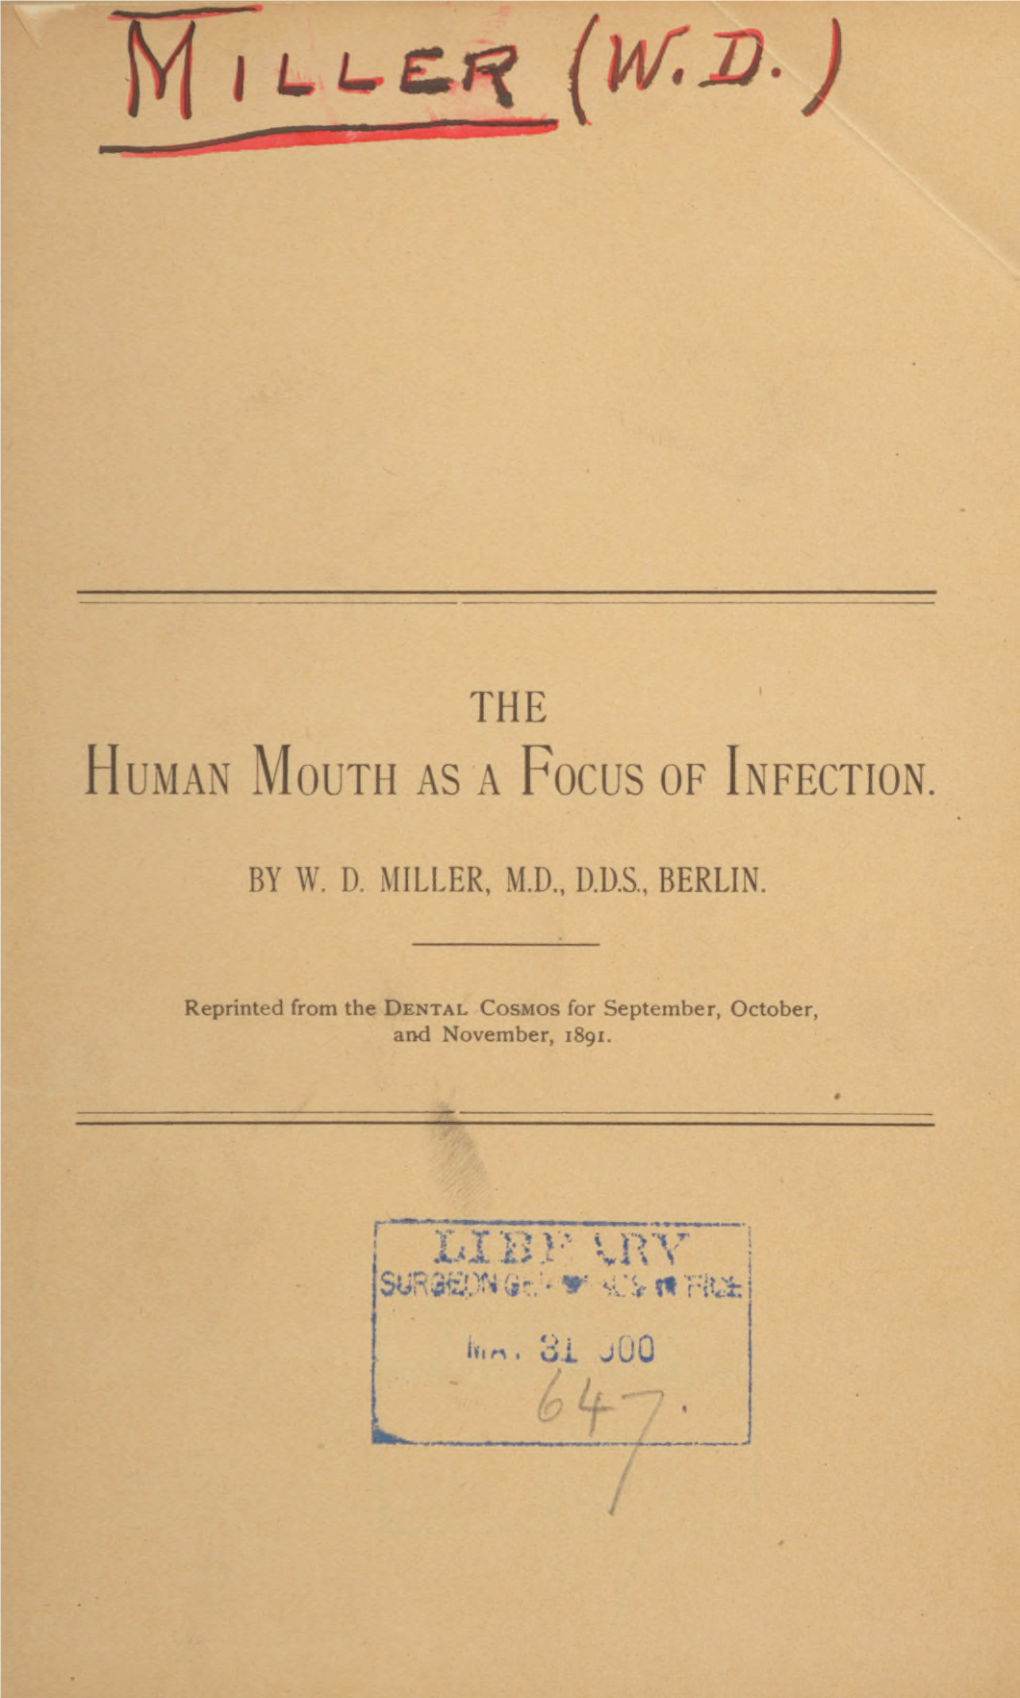 The Human Mouth As a Focus of Infection